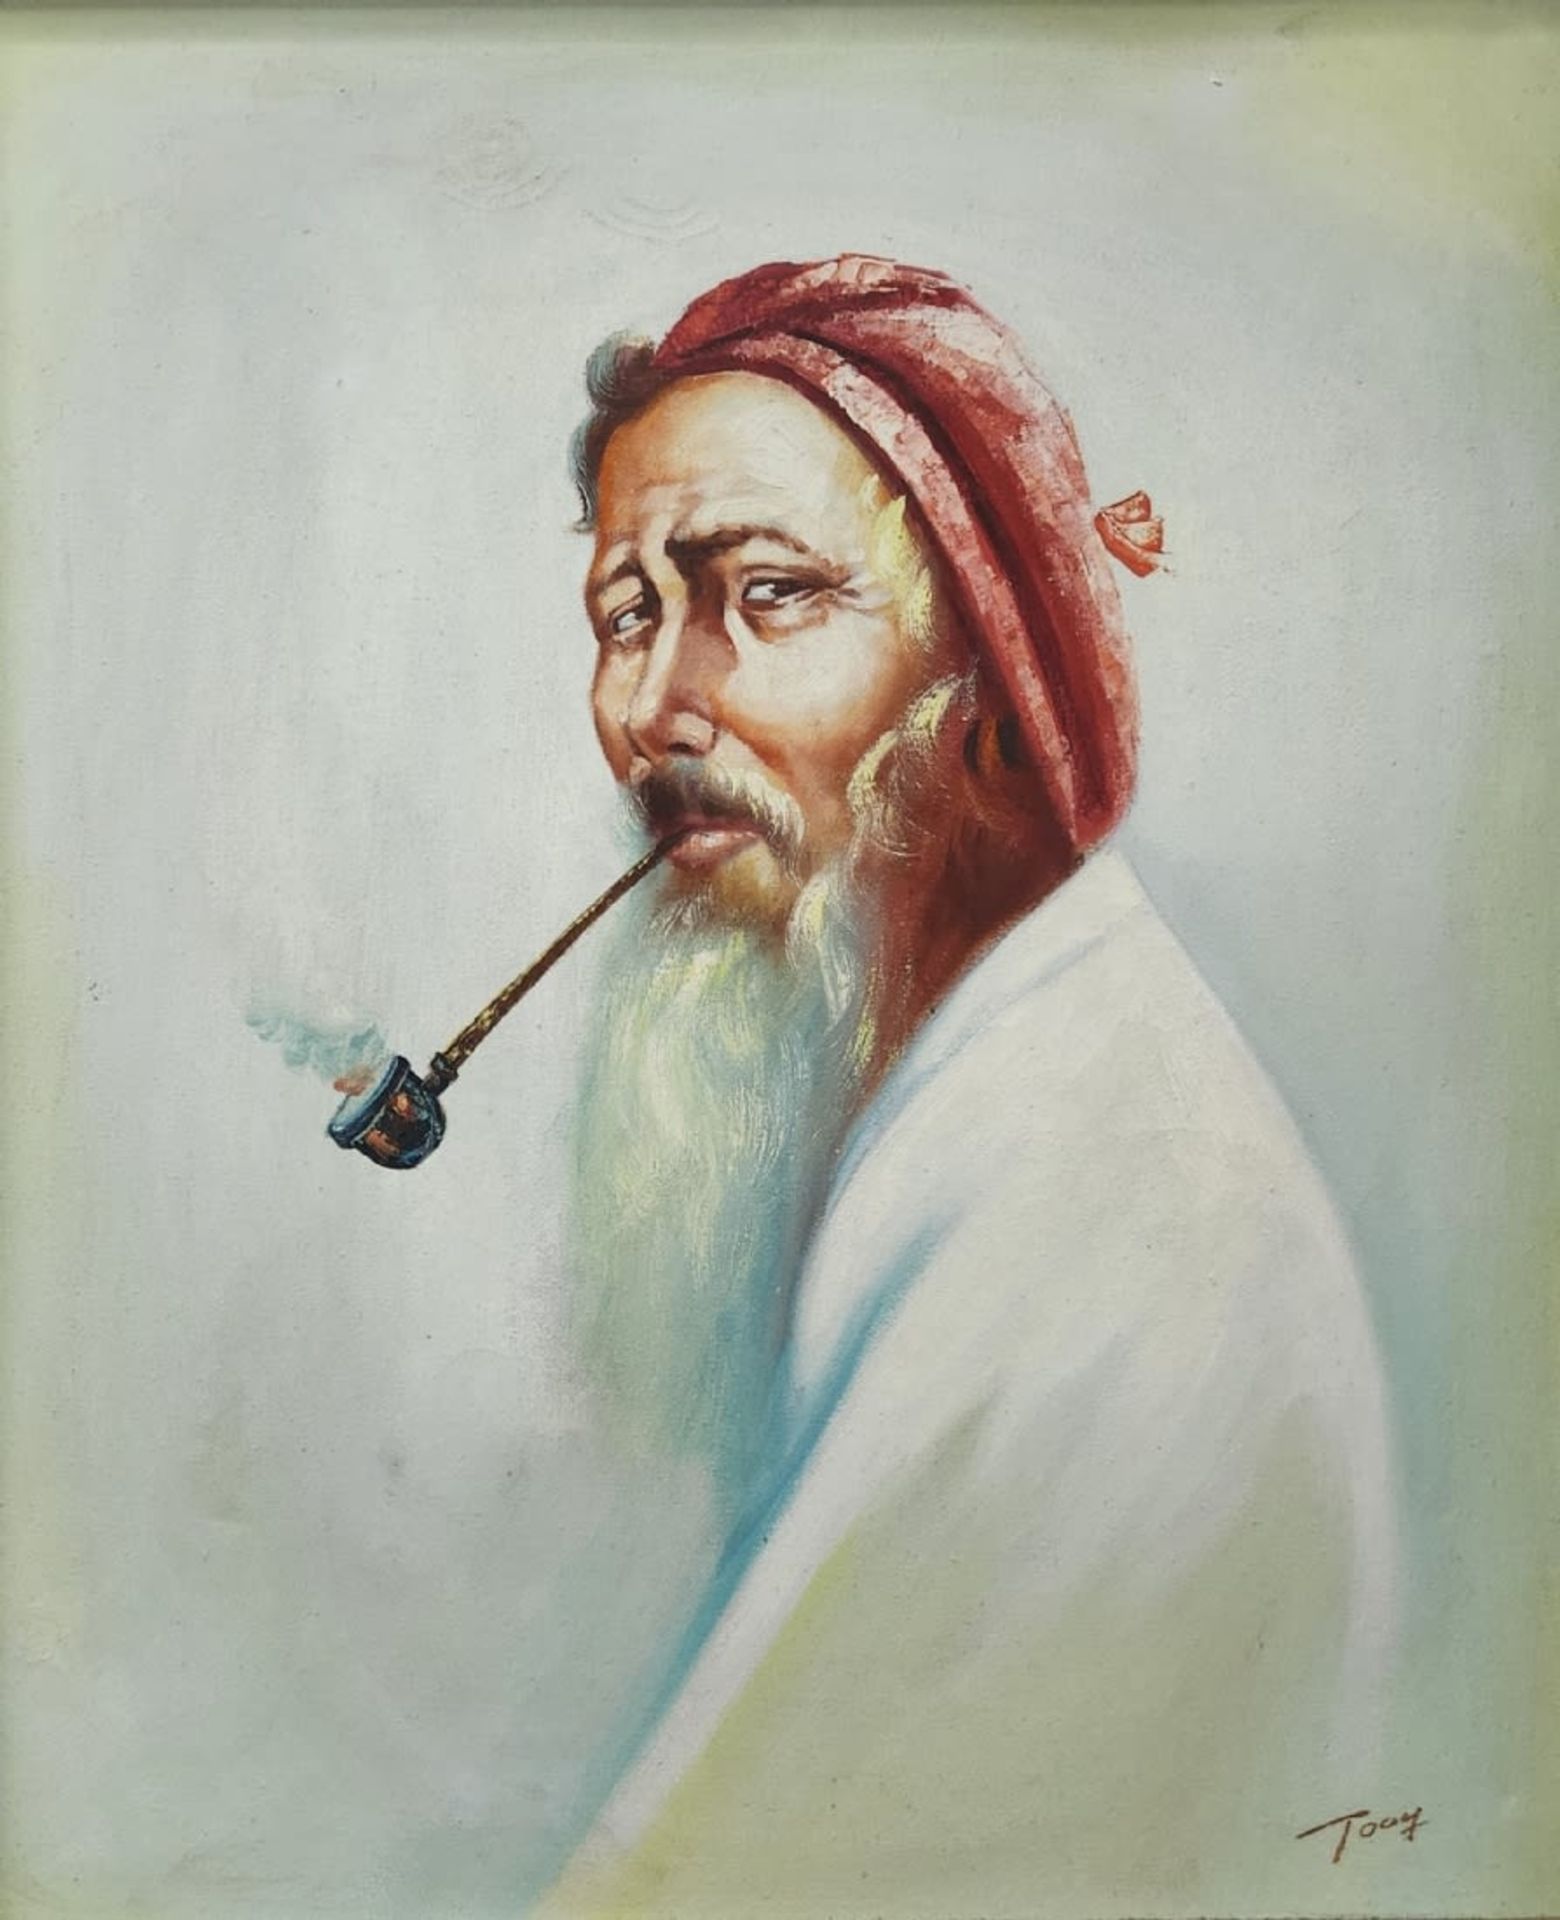 'Pipe smoker' - painting, oil on canvas, signed. Dimensions: 59.5X49 cm. Frame dimensions: 71.5X61